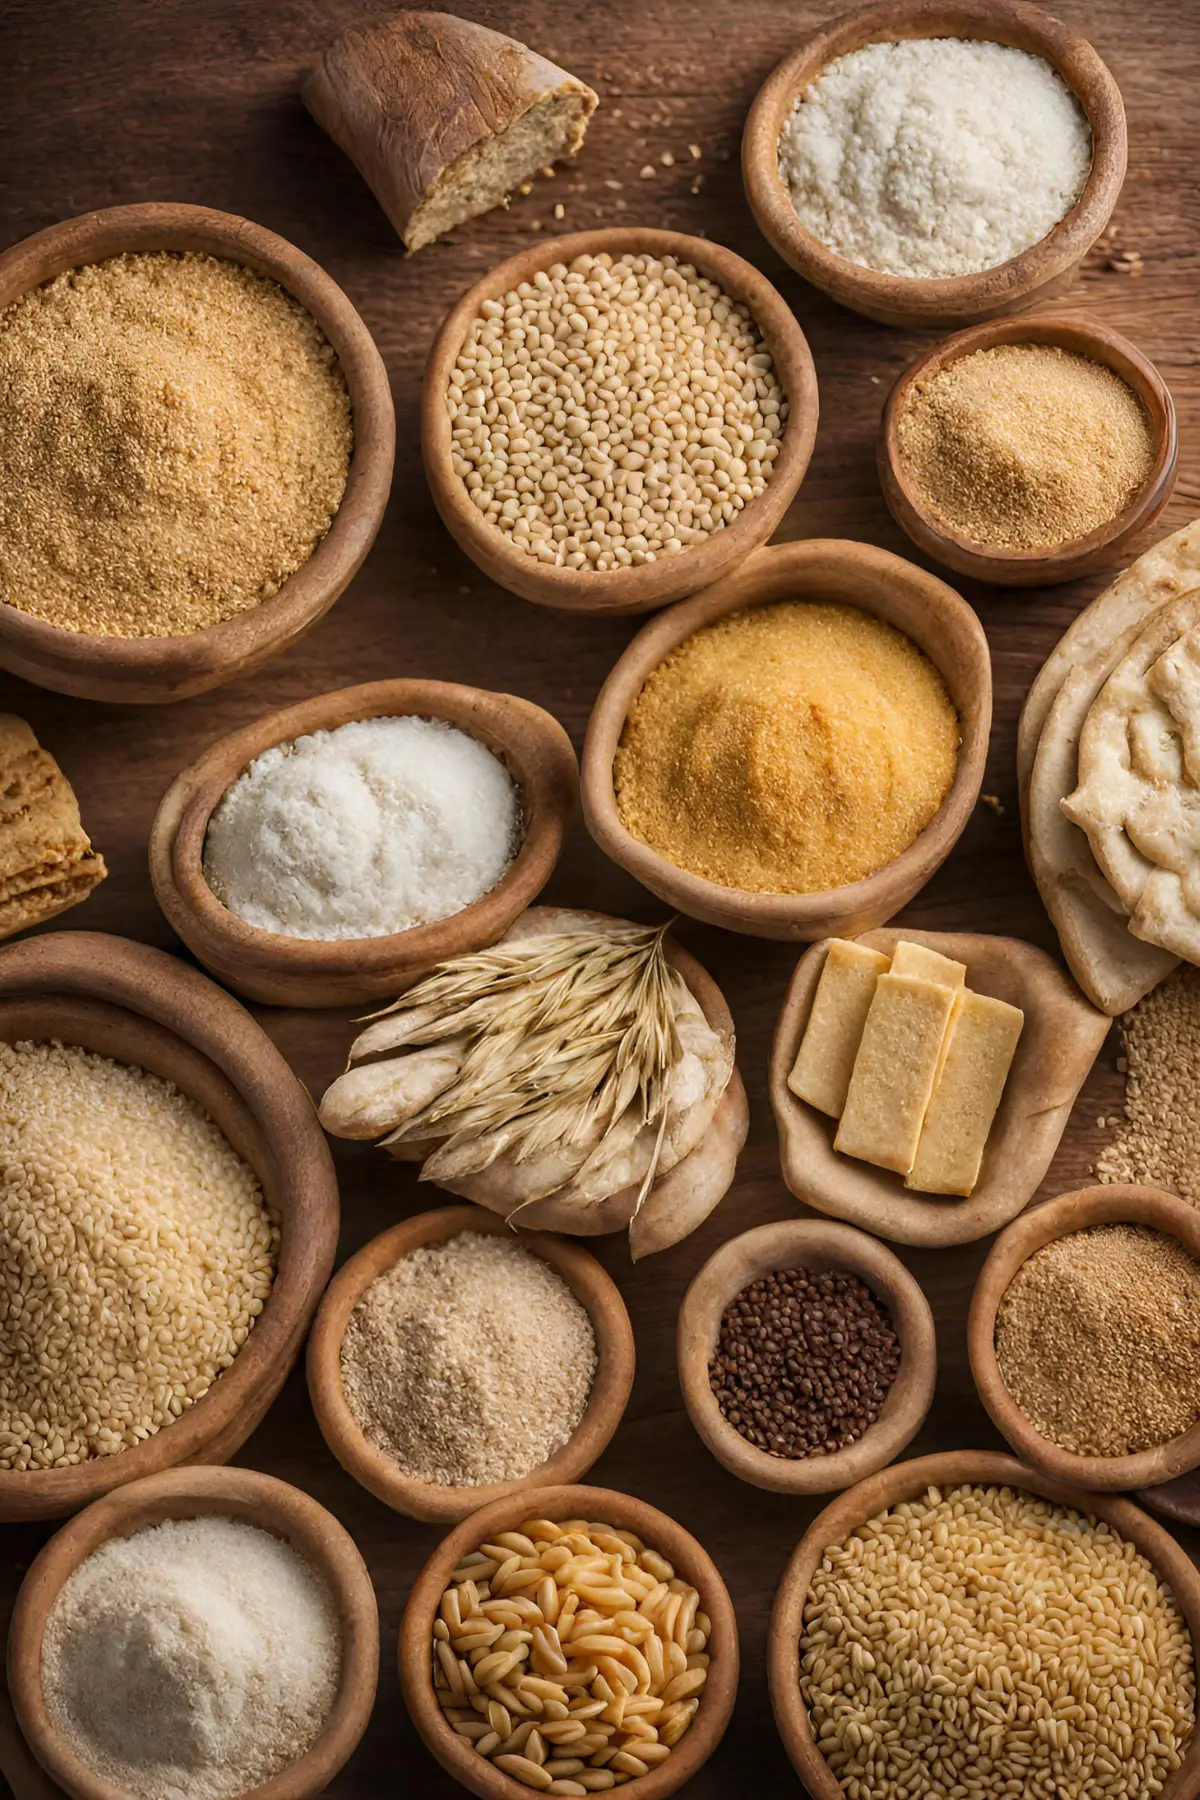 Contemporary Gluten-Containing Foods and Their Halal Status